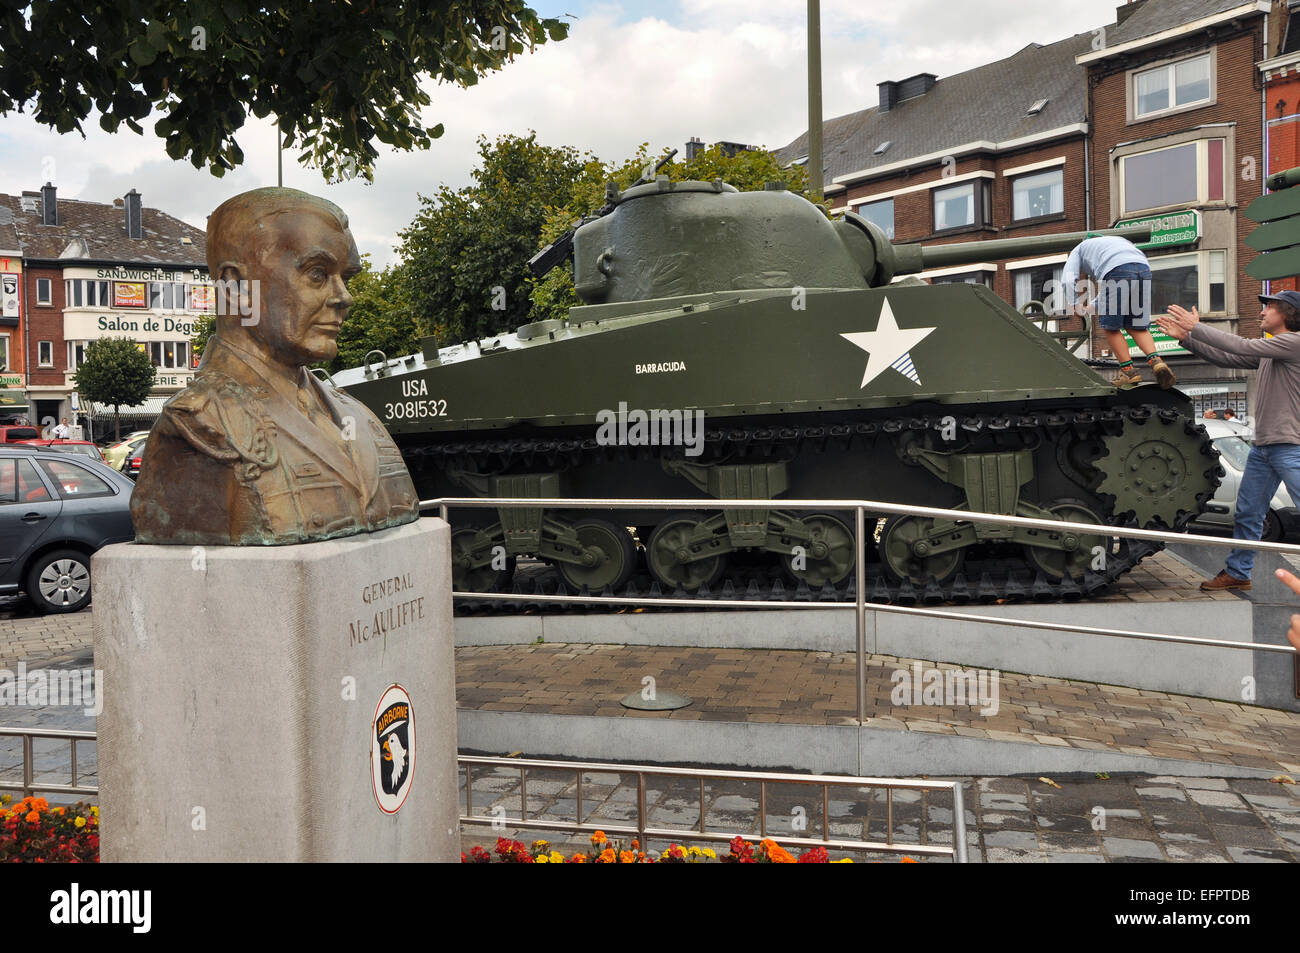 BASTOGNE, BELGIUM - AUGUST 2010: A statue of General McAuliffe in front of a Sherman tank Stock Photo